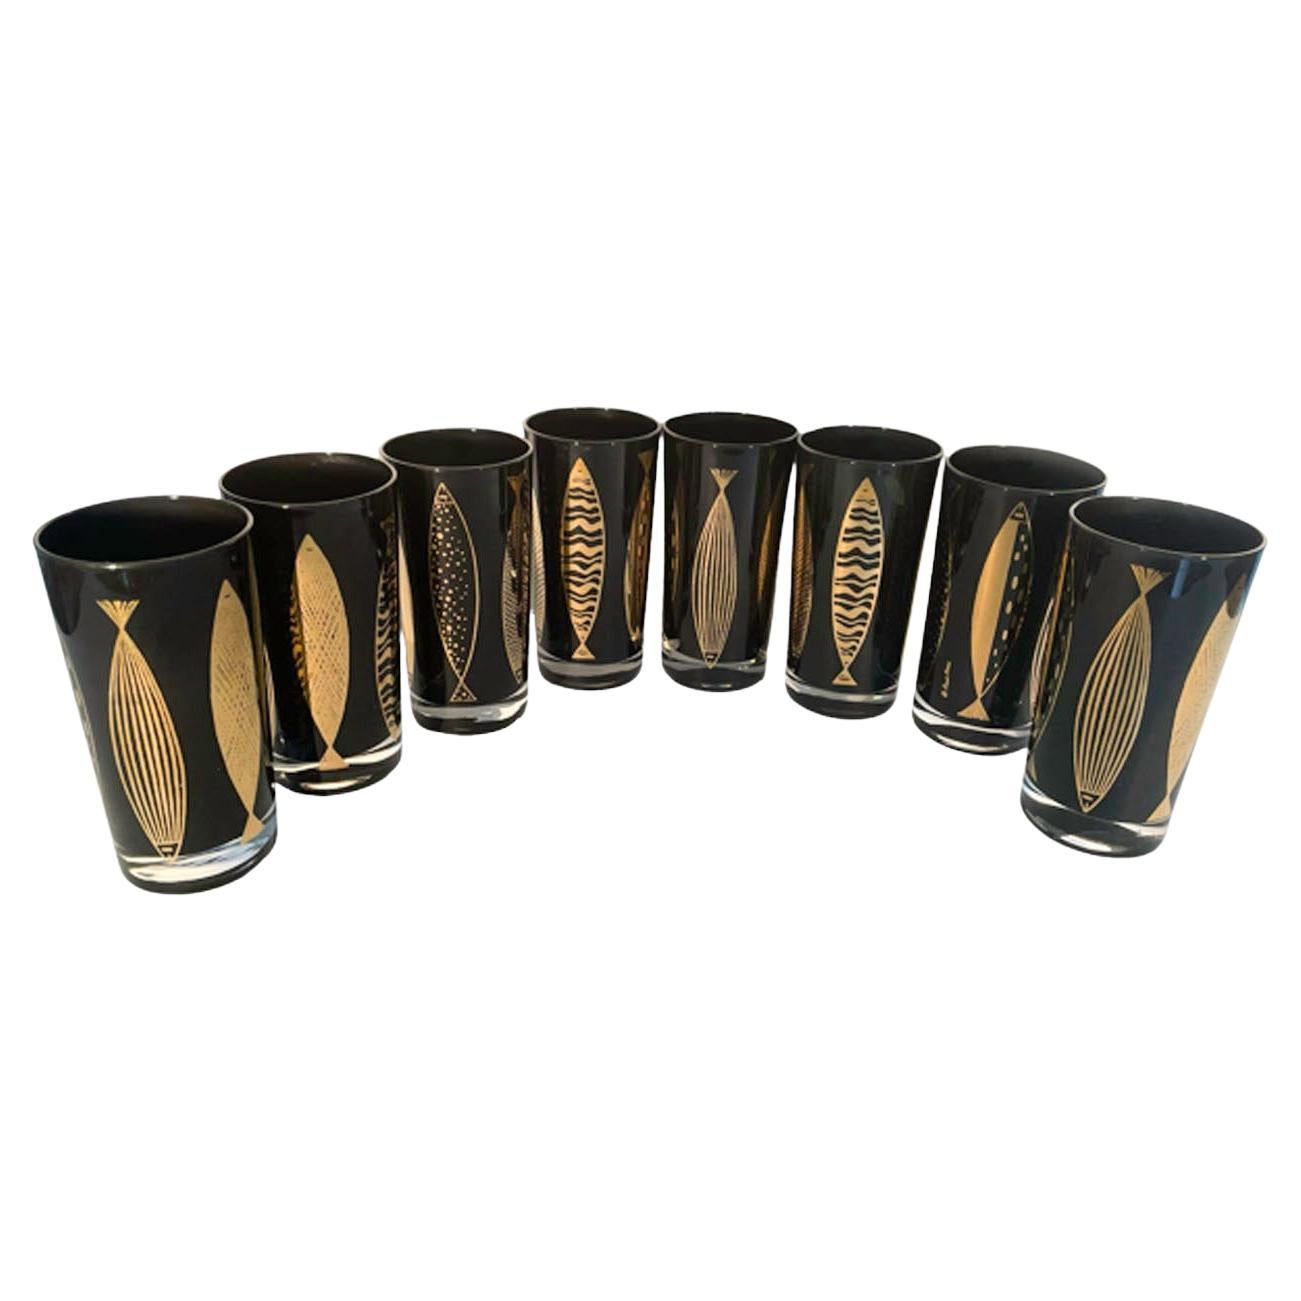 MCM, Fred Press "Gold Fish" Highball Glasses, 22 Karat Gold on Black Frosted For Sale